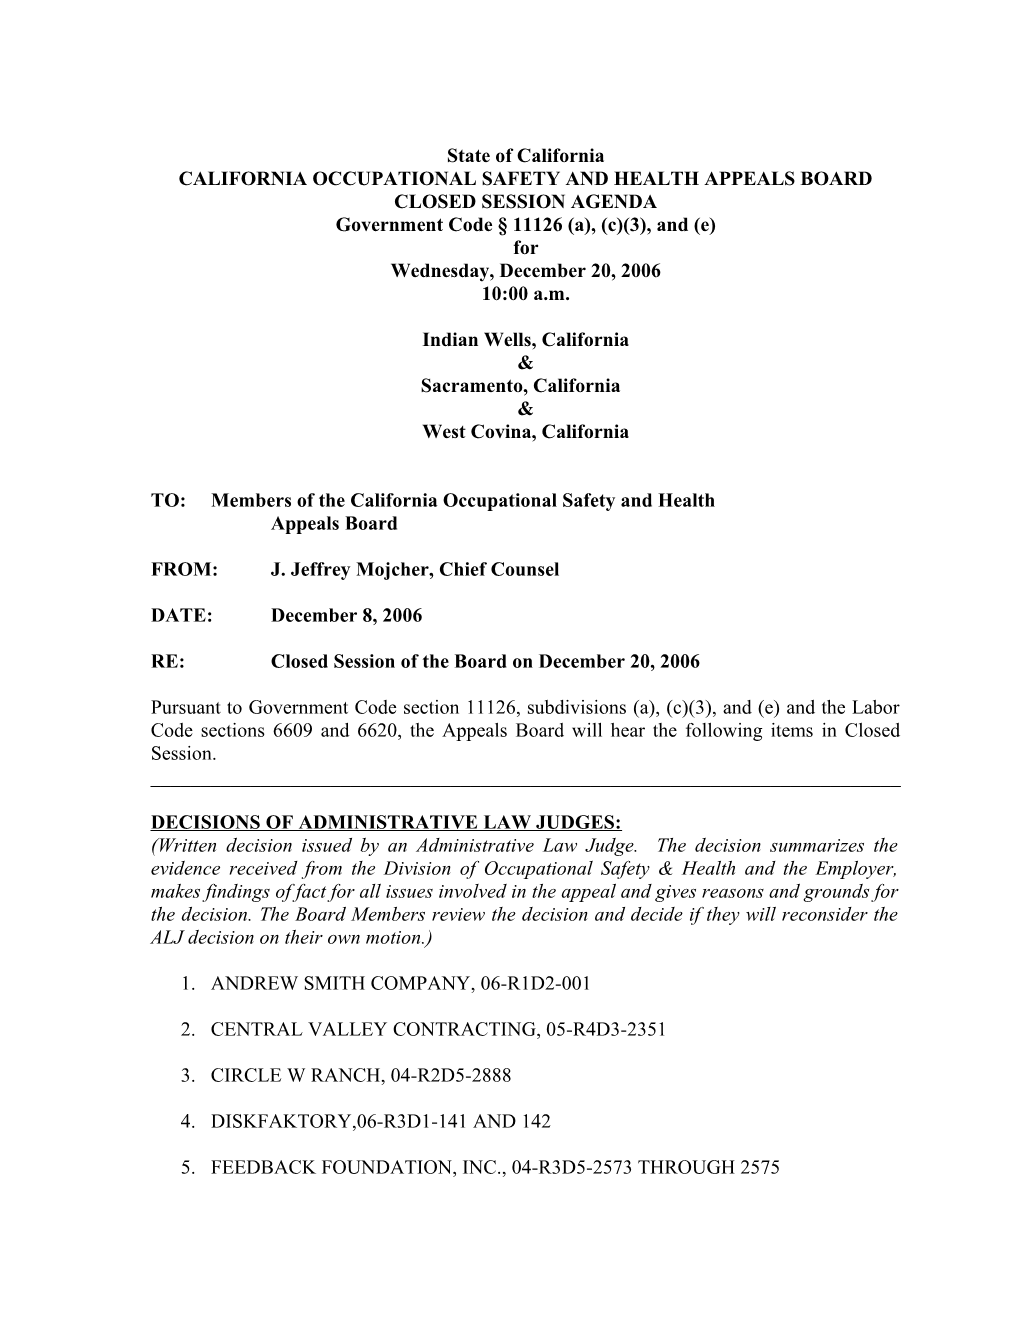 California Occupational Safety & Health Appeals Board s4